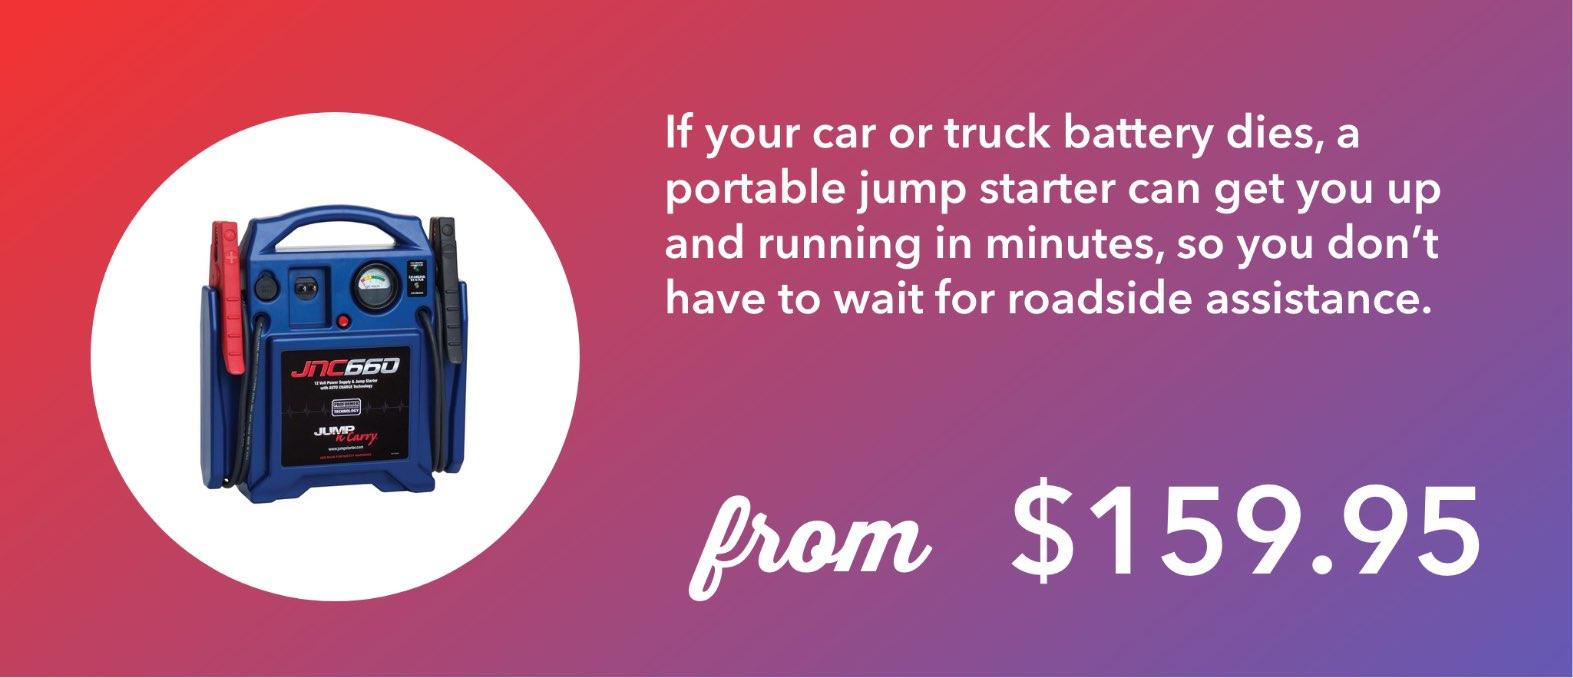 If your car or truck battery dies, a portable jump starter can get you up and running in minutes, so you don’t have to wait for roadside assistance.